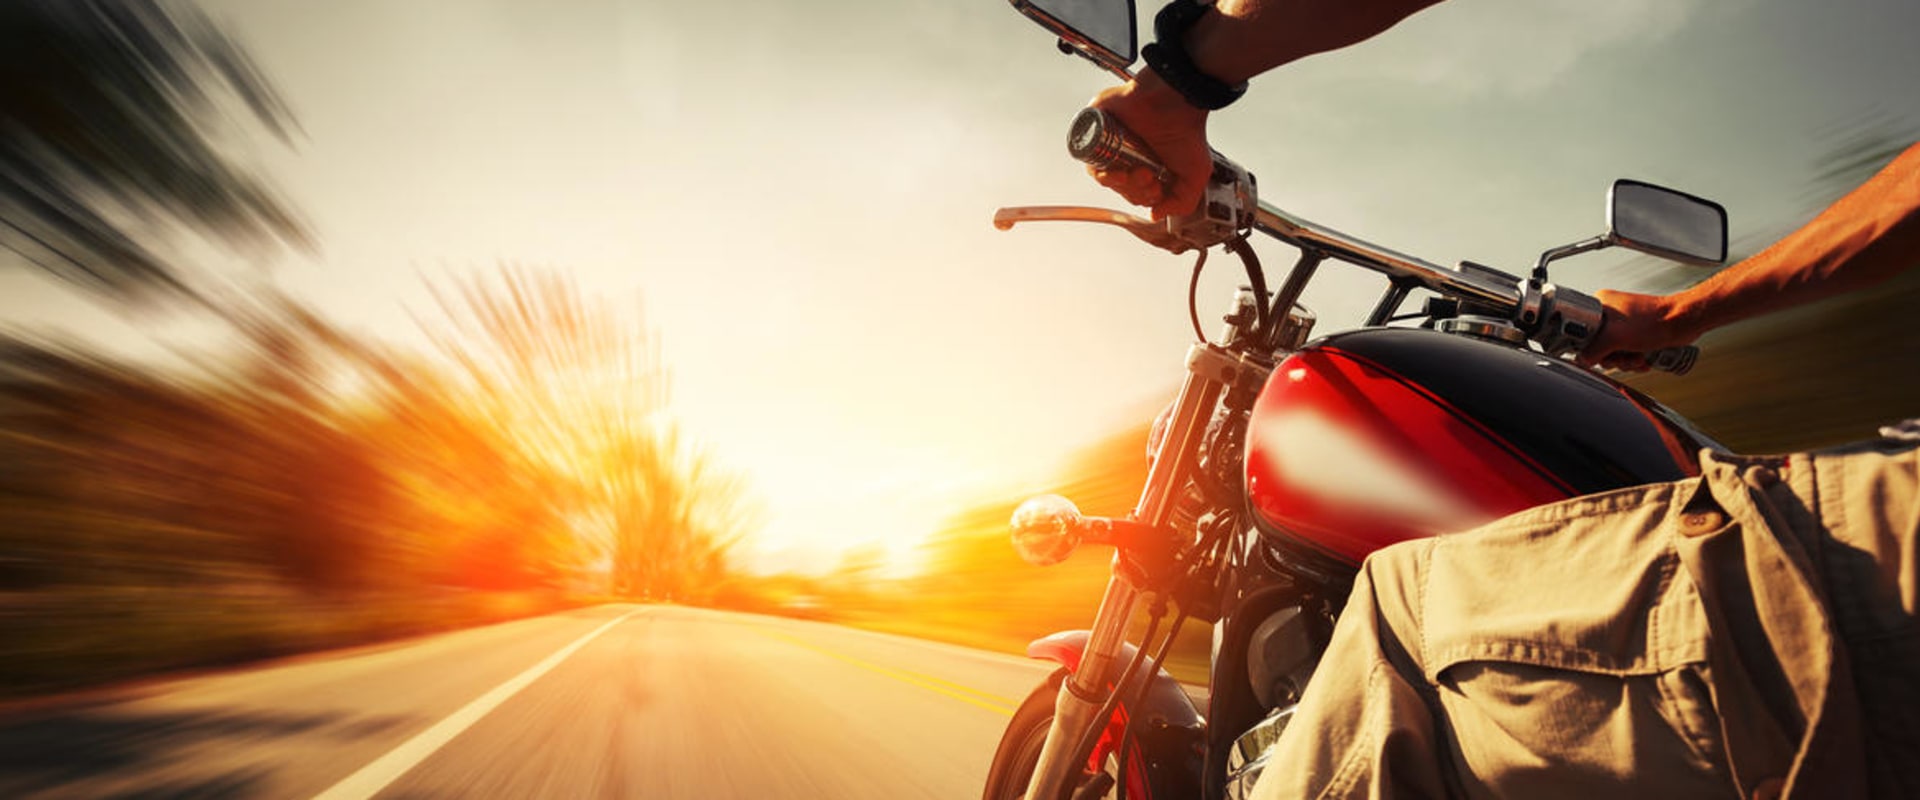 How Much Does Motorcycle Insurance Cost In California?